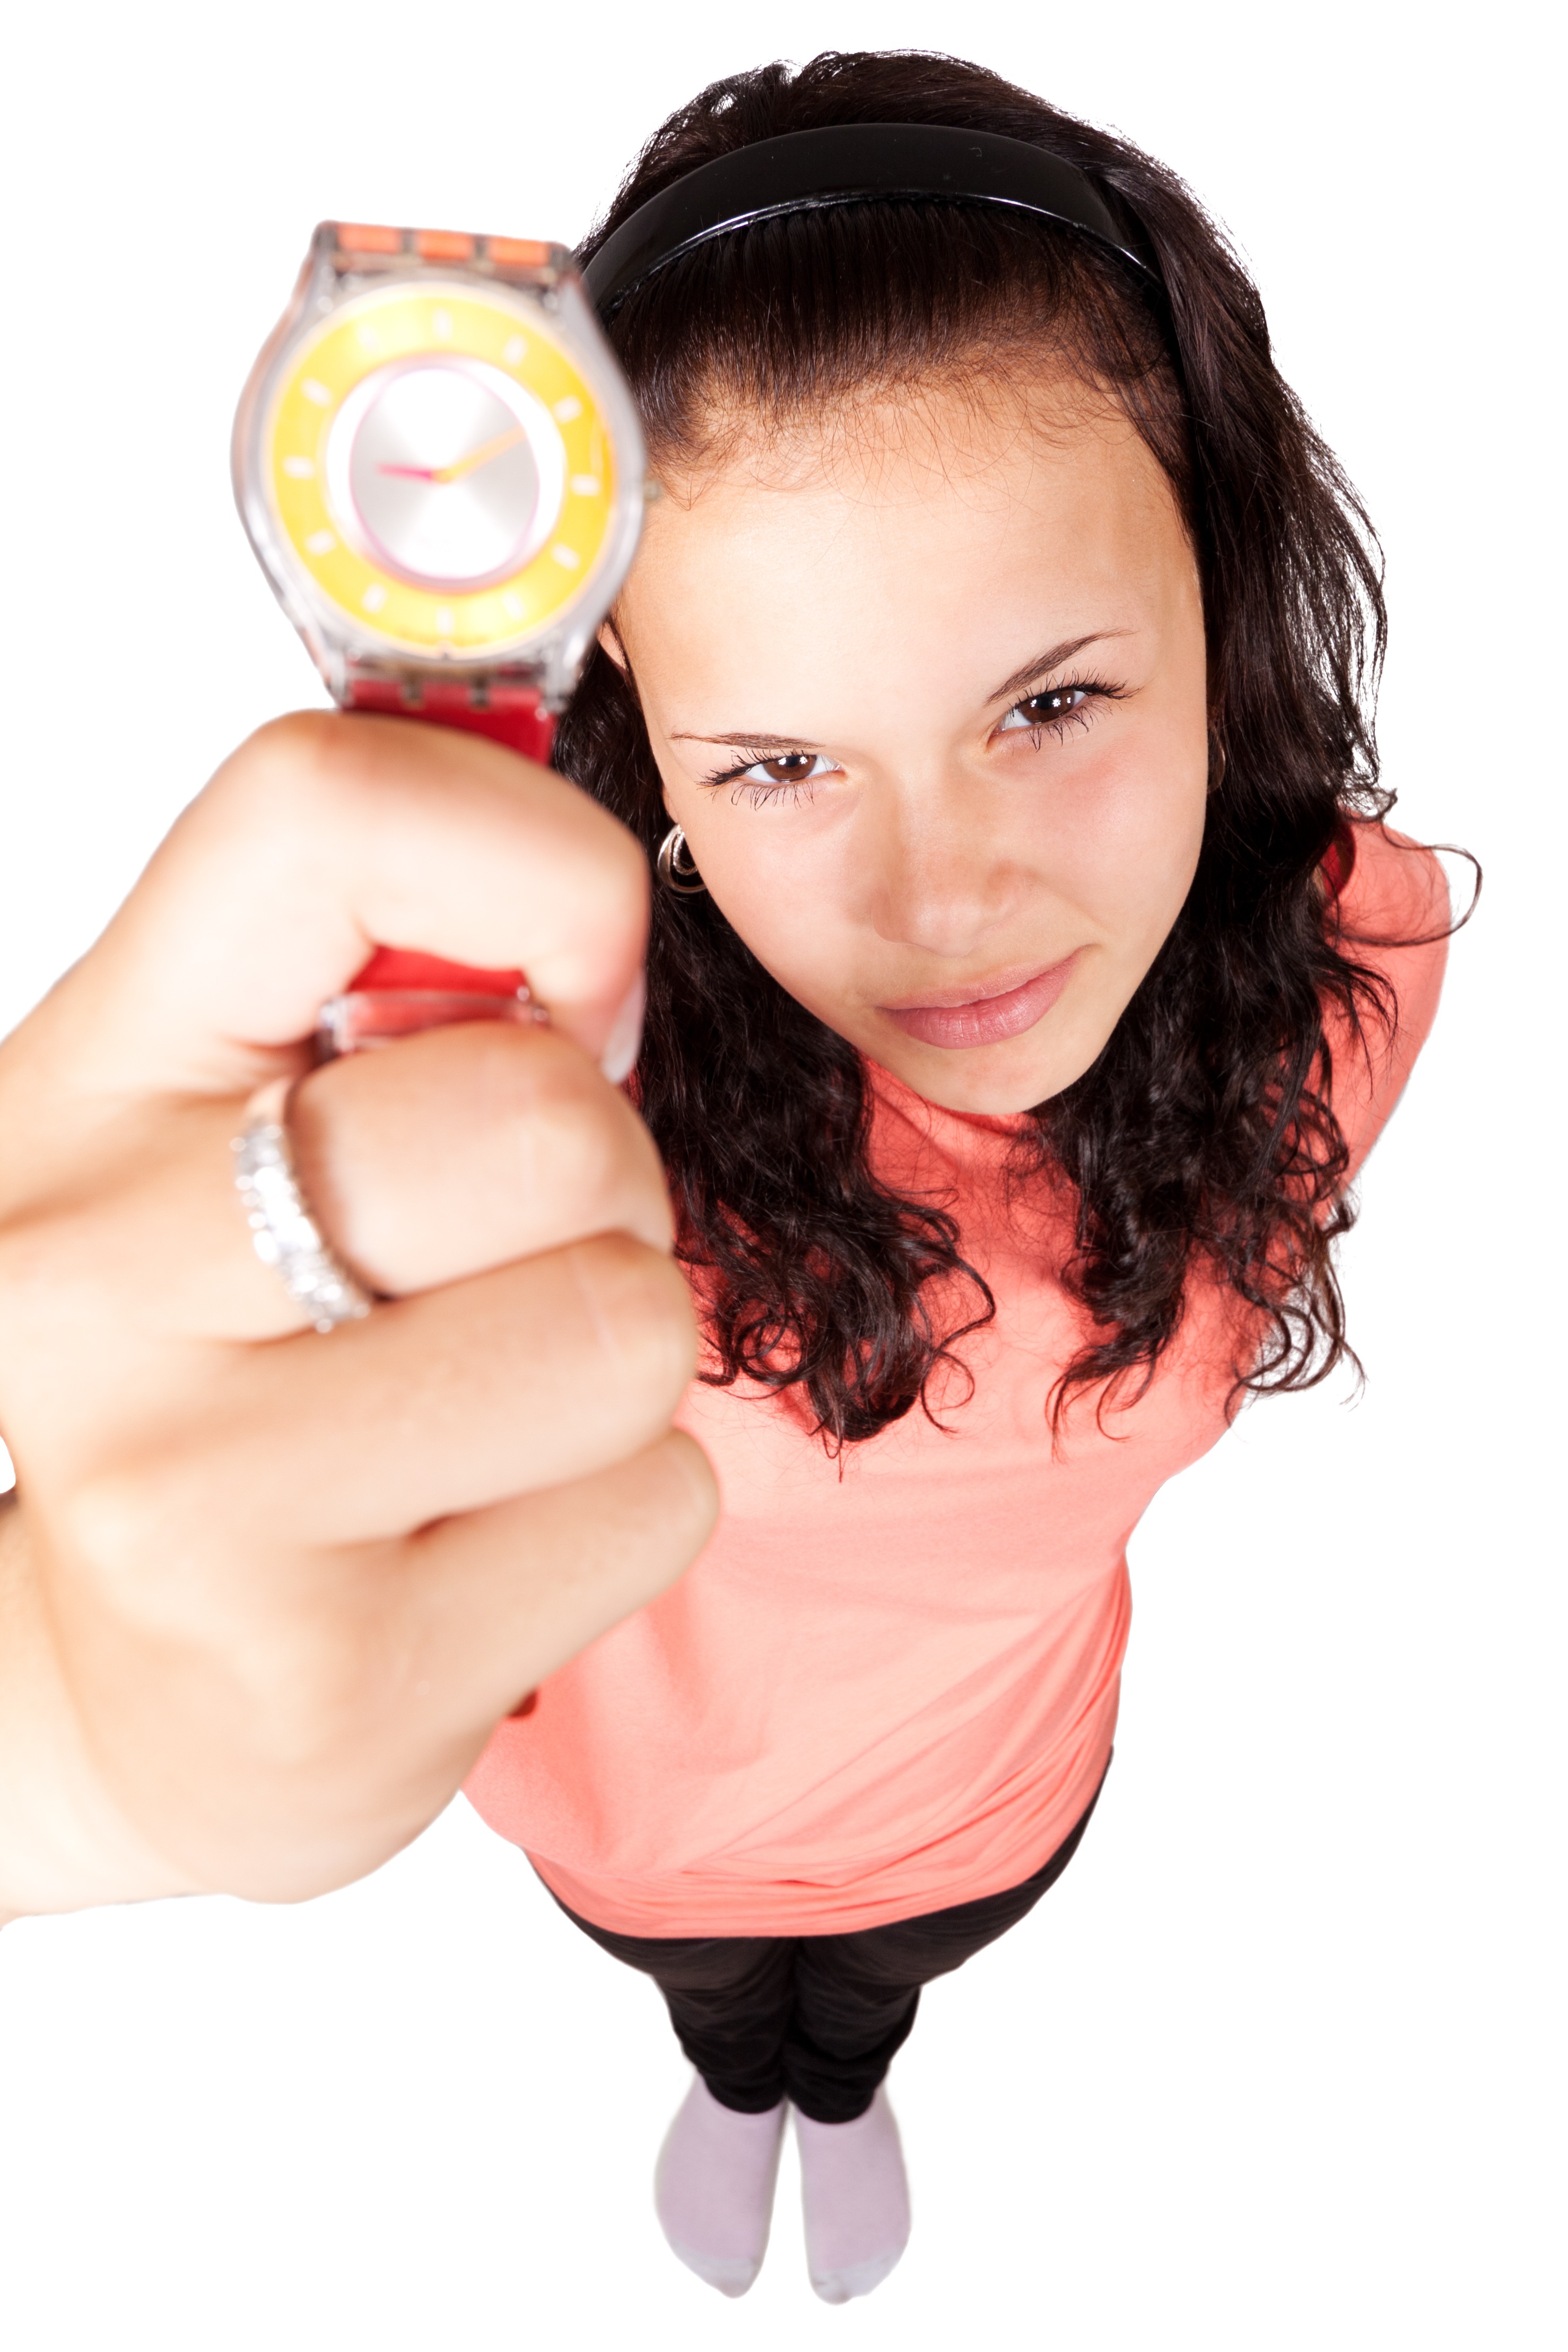 Girl with watch photo